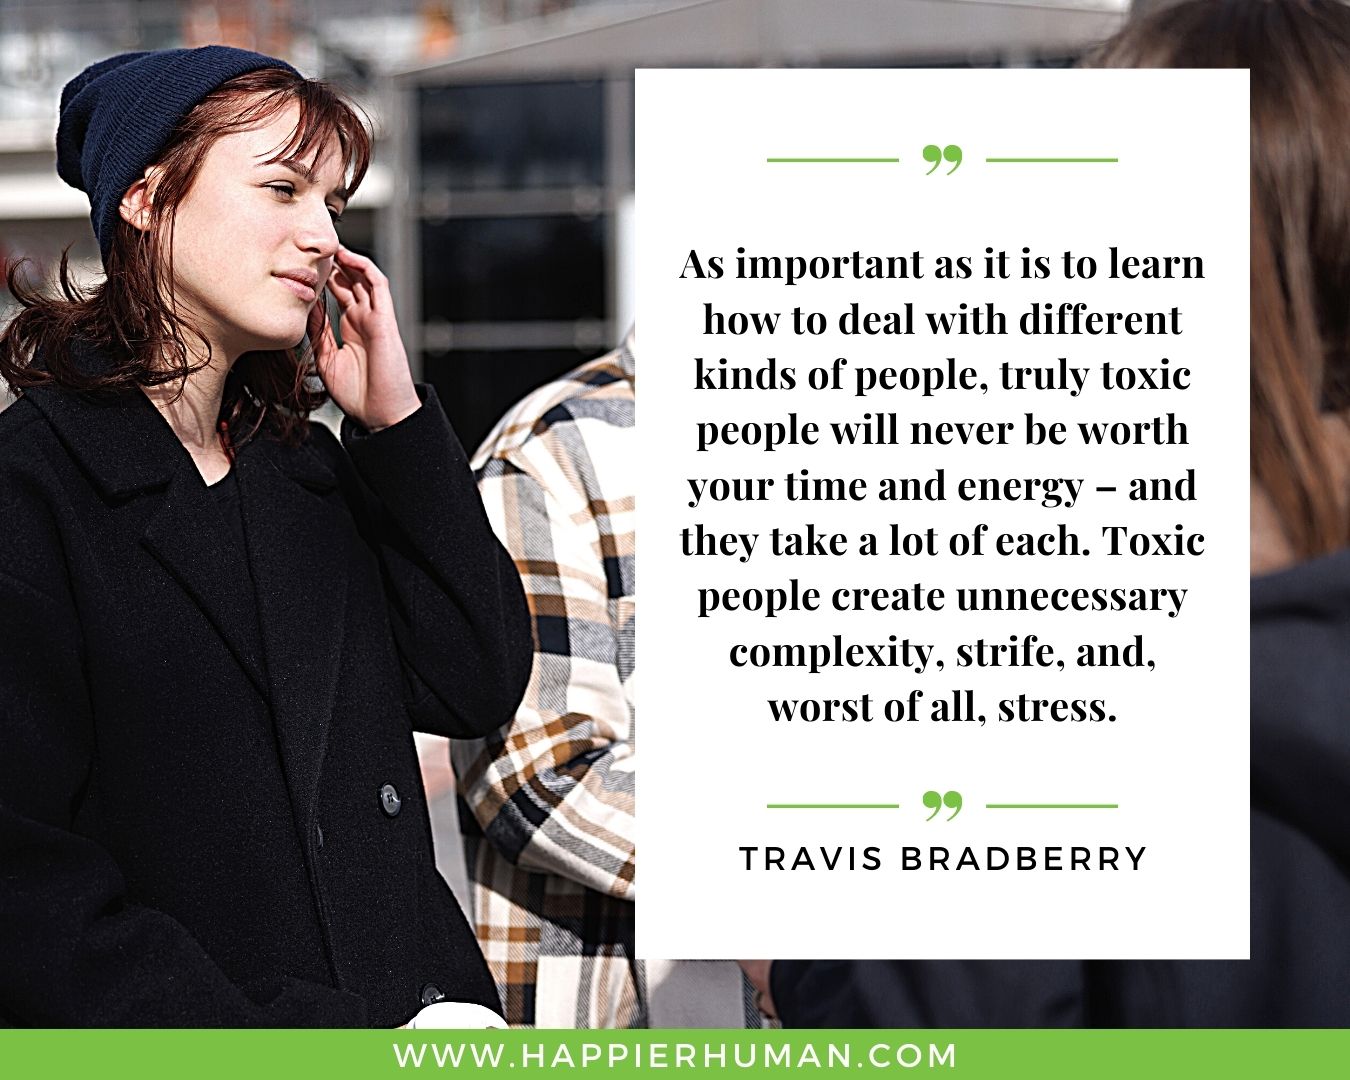 Toxic People Quotes - “As important as it is to learn how to deal with different kinds of people, truly toxic people will never be worth your time and energy – and they take a lot of each. Toxic people create unnecessary complexity, strife, and, worst of all, stress.” – Travis Bradberry